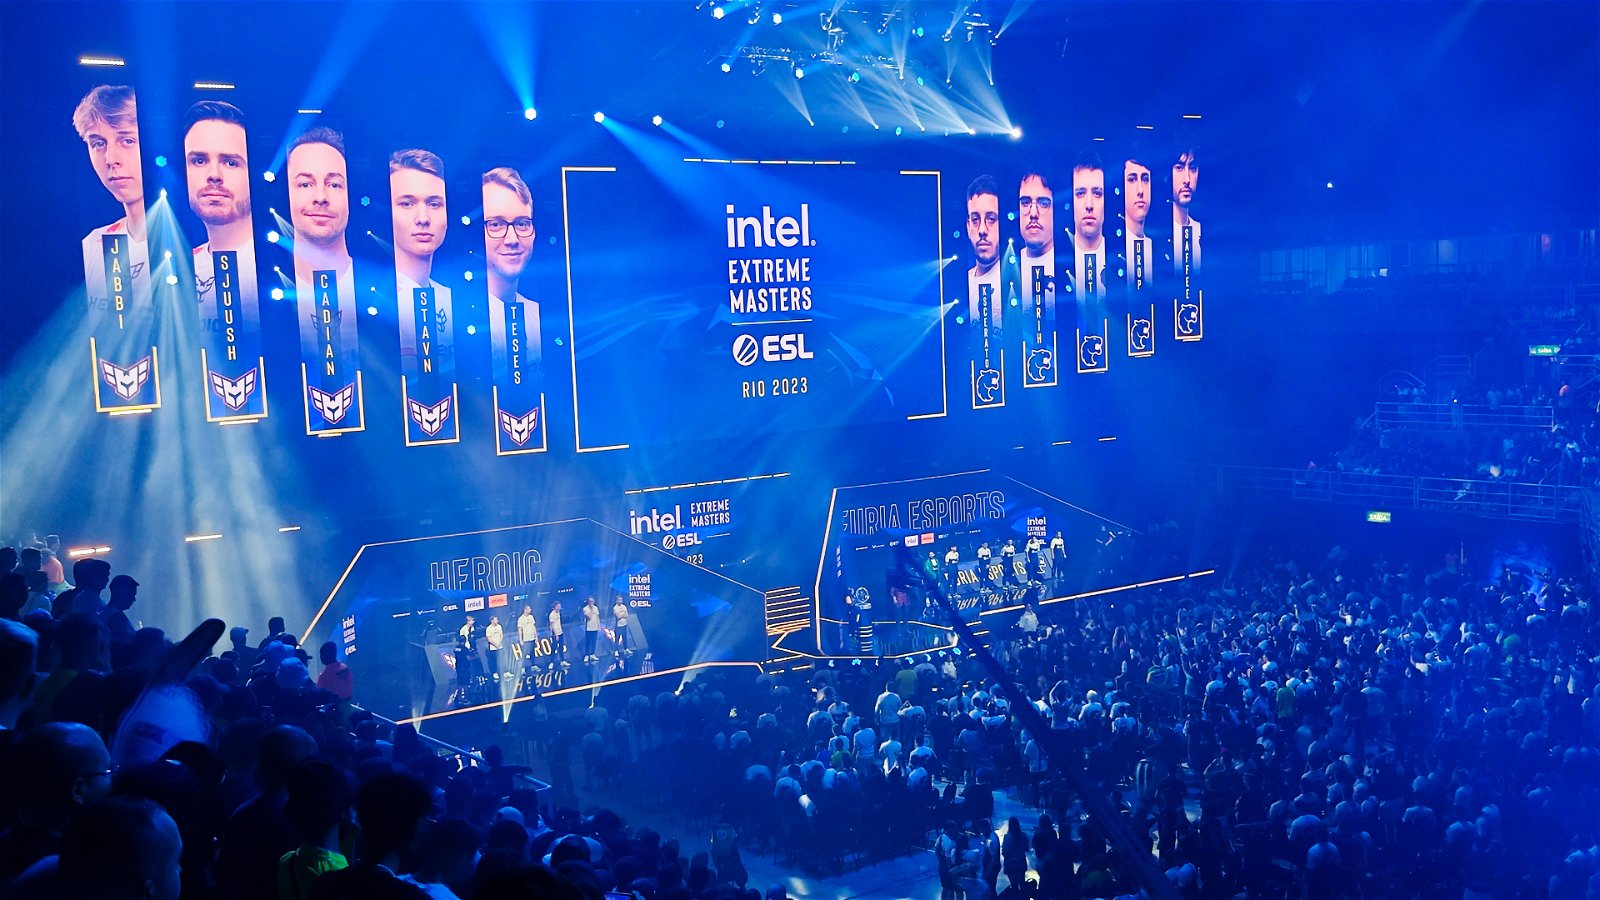 Intel Extreme Masters Iem Rio 2023 Esports Are Alive Amp Well 23042204 3